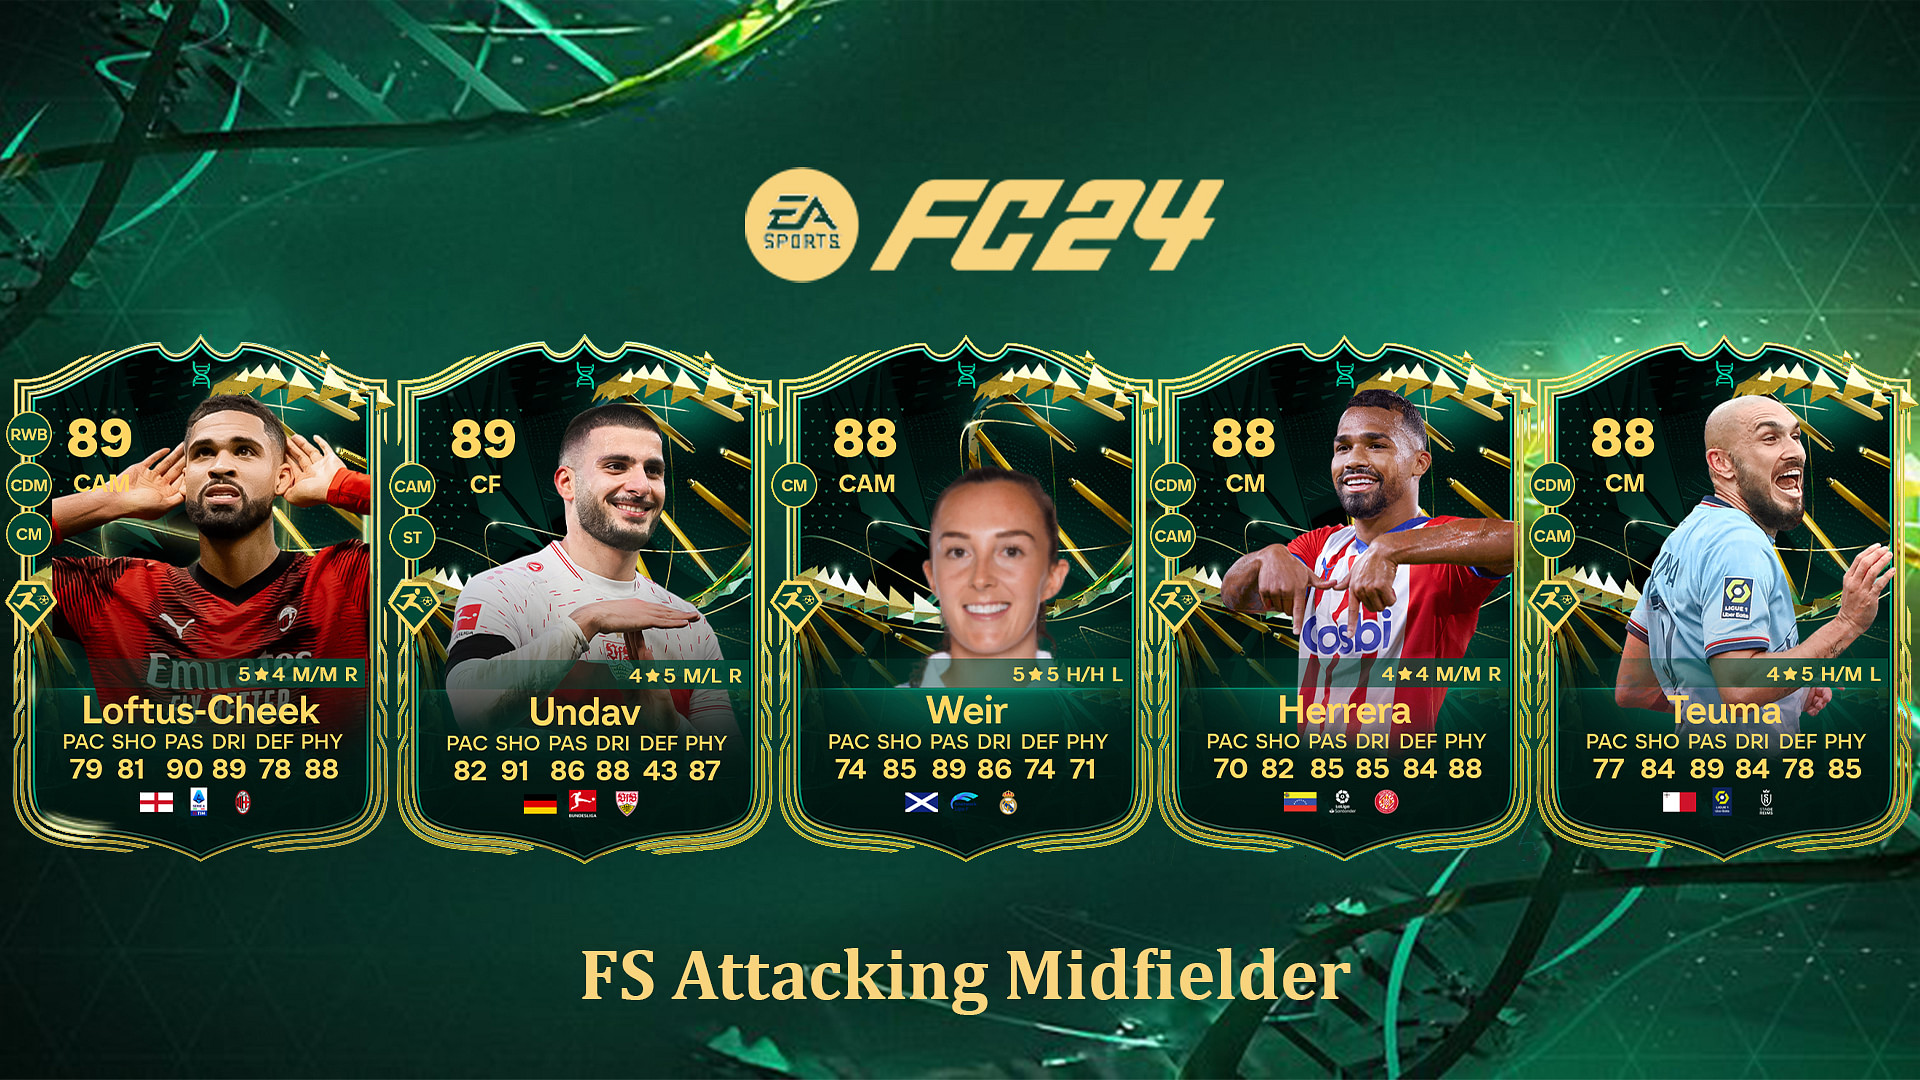 EA Sports FC 24 Attacking Midfielders with the Highest Potential